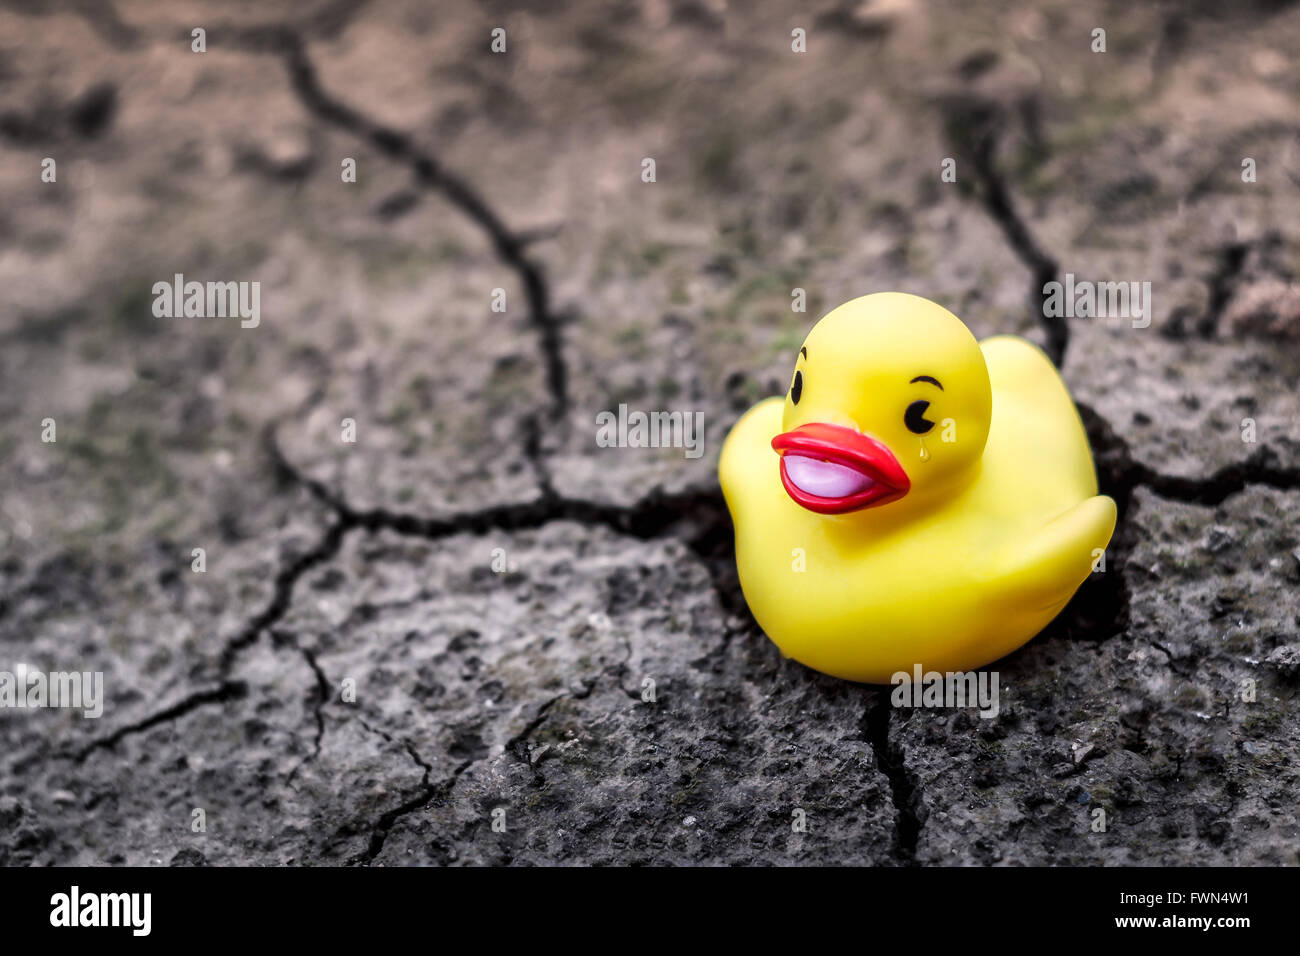 Yellow rubber duck with tear in eye on dry cracked land. Concept image for global warming, drought and climate change. Stock Photo